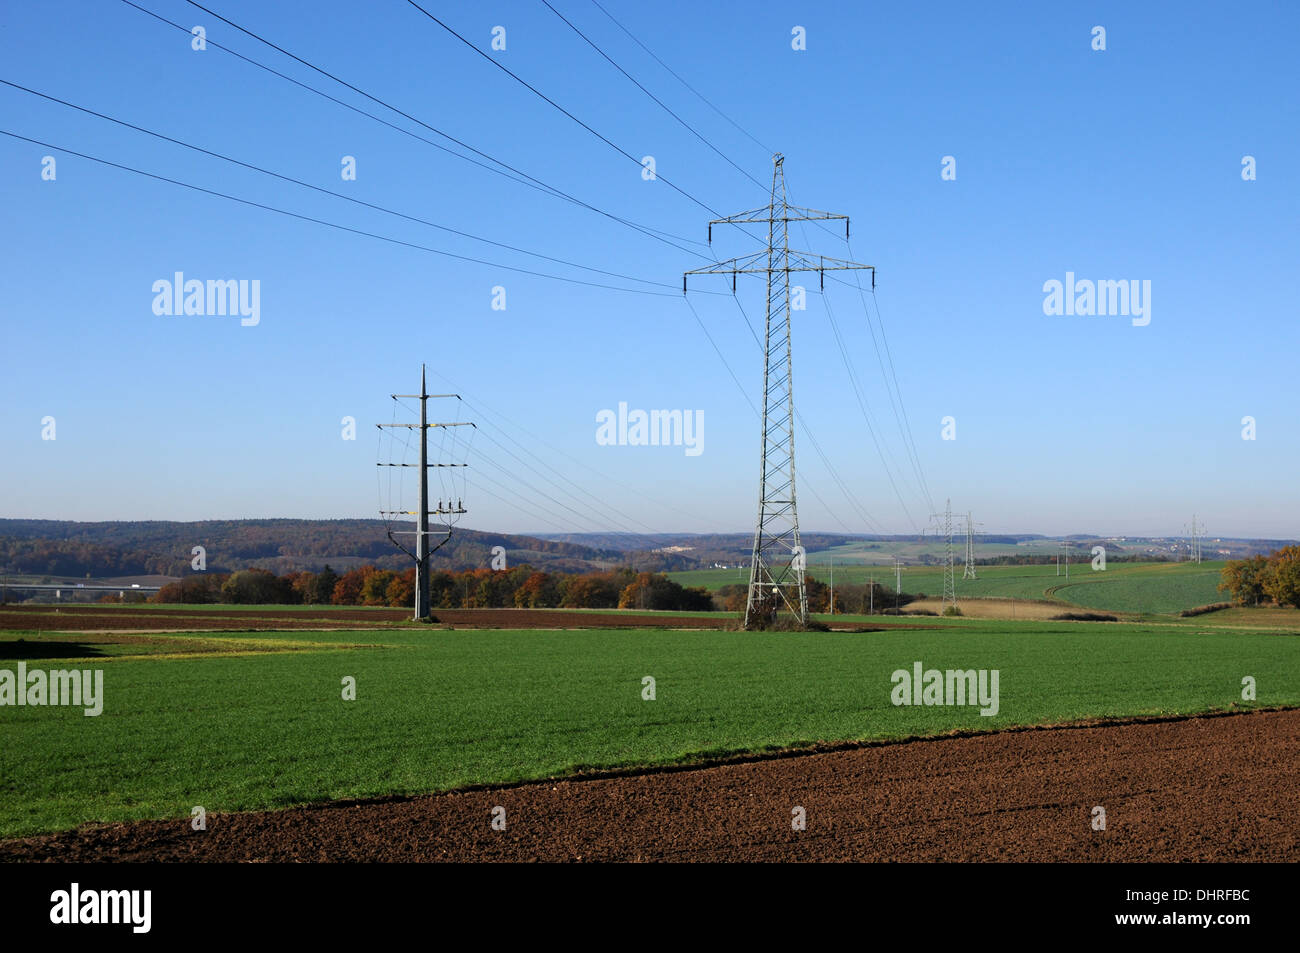 Overhead power line and ground cables Stock Photo